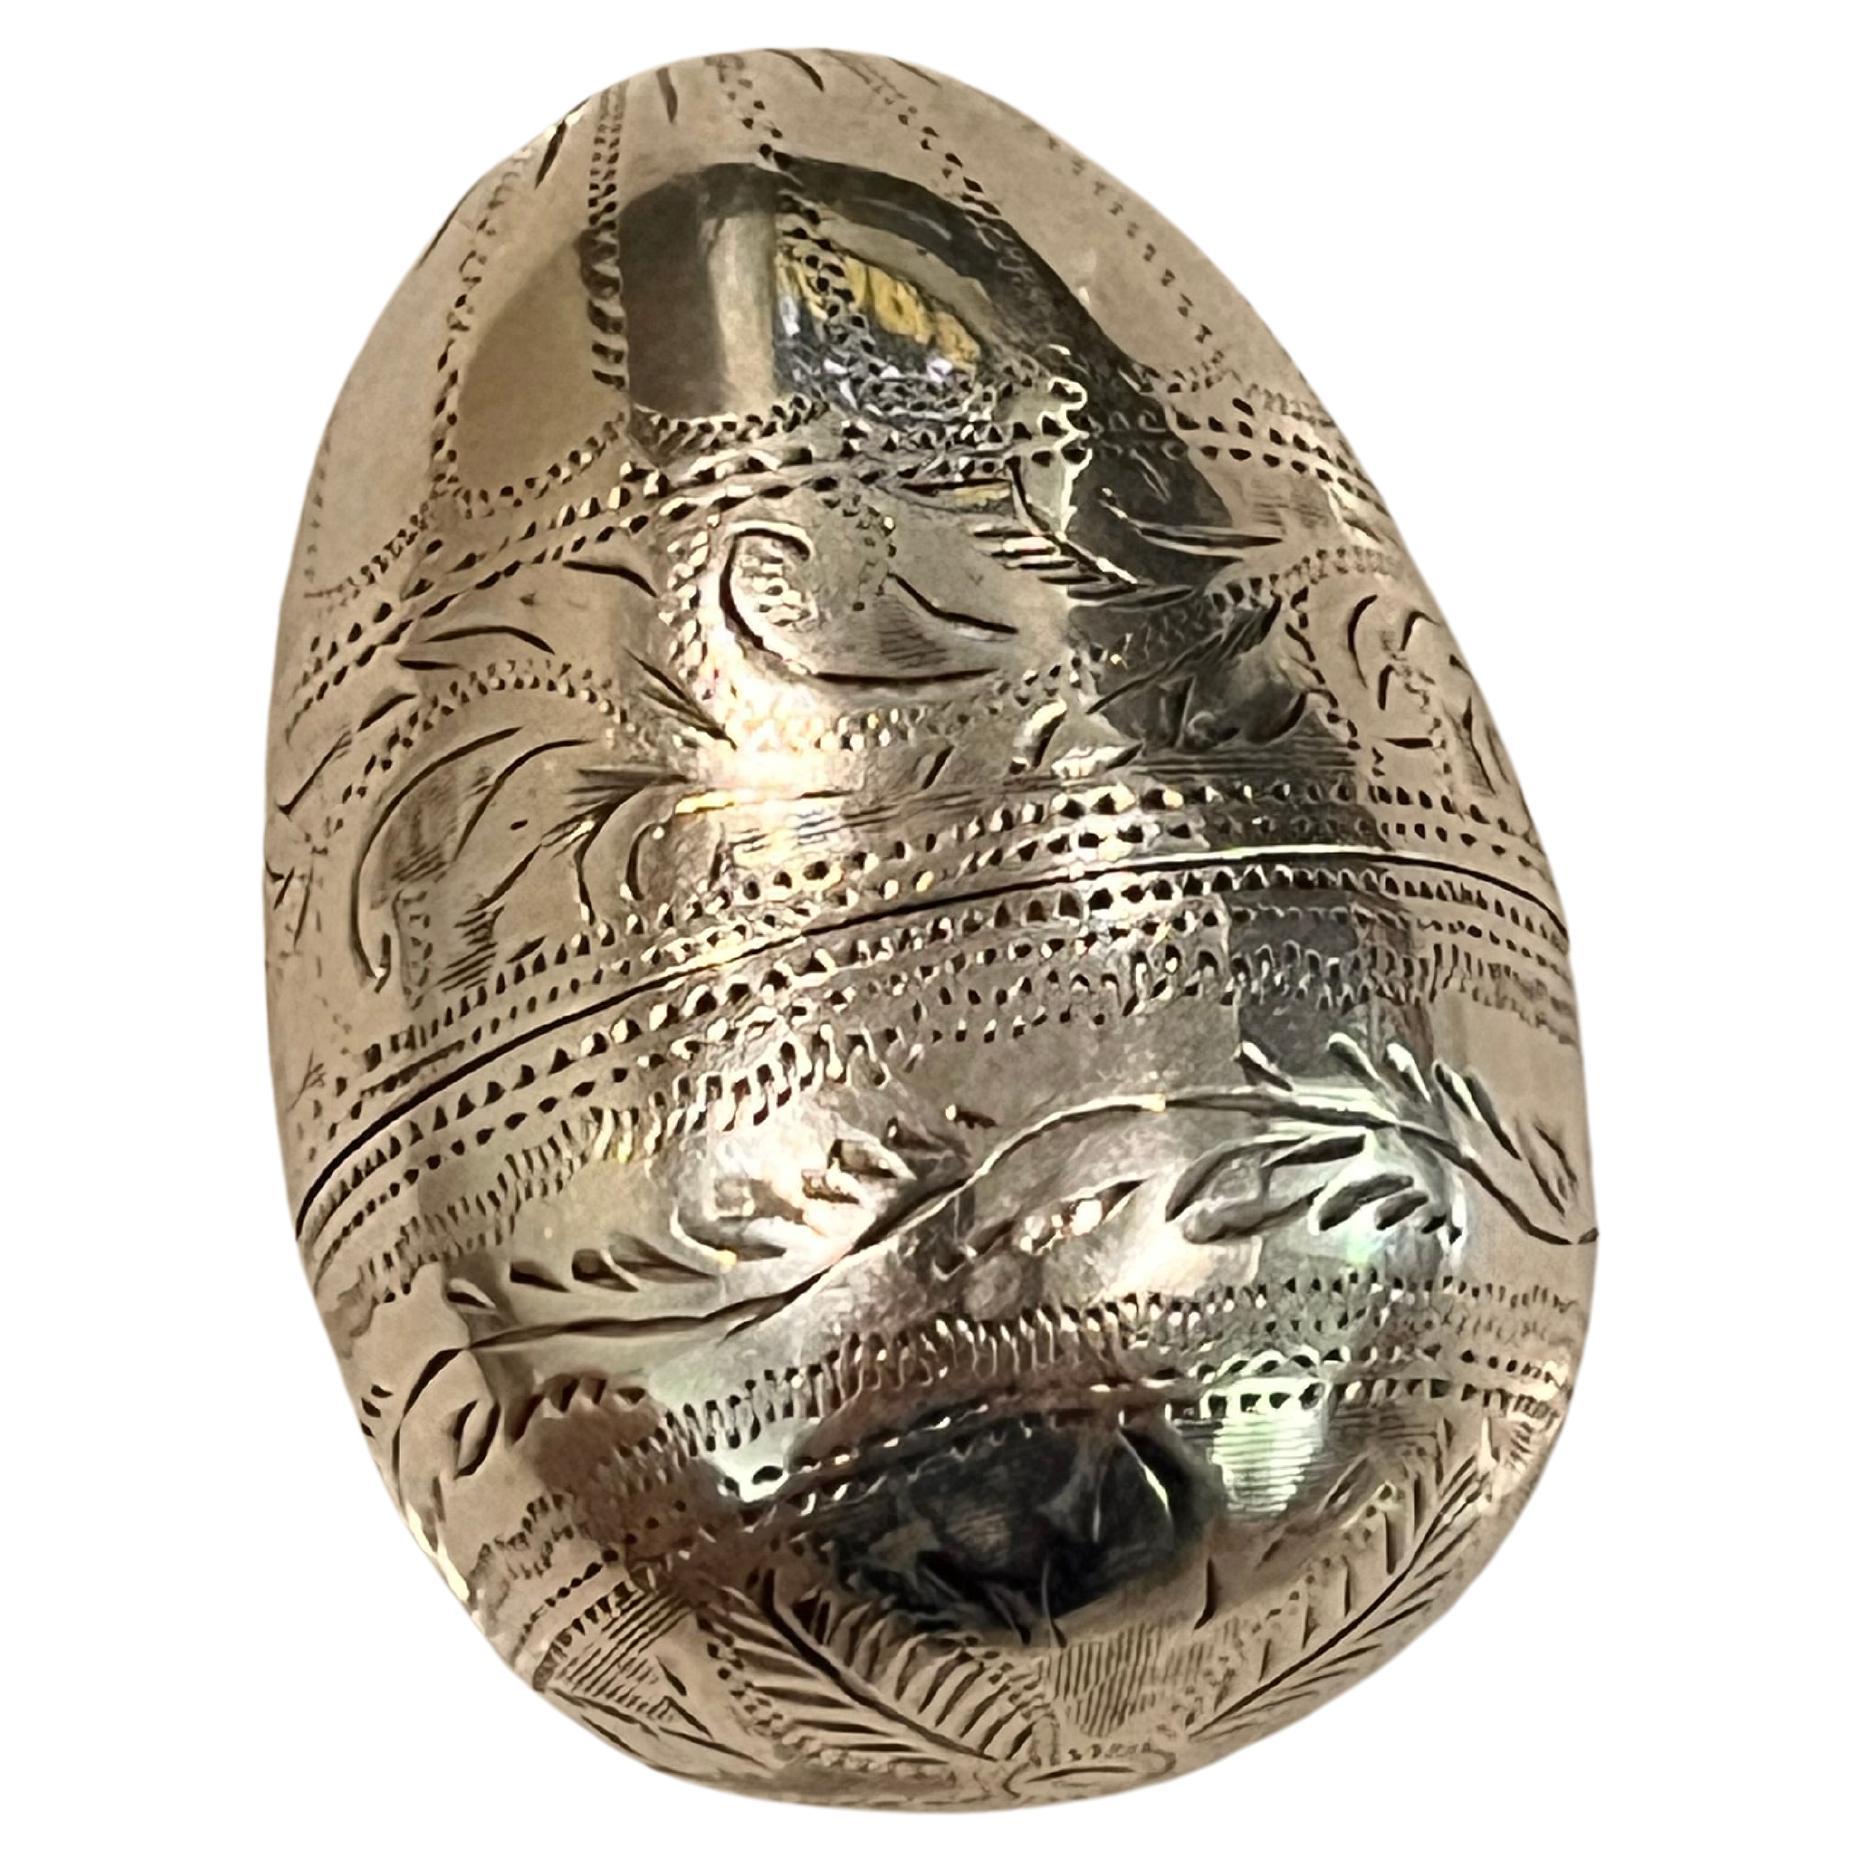 Fine George III Silver Egg Nutmeg Grater with Bright-Cut Decoration, c.1800.